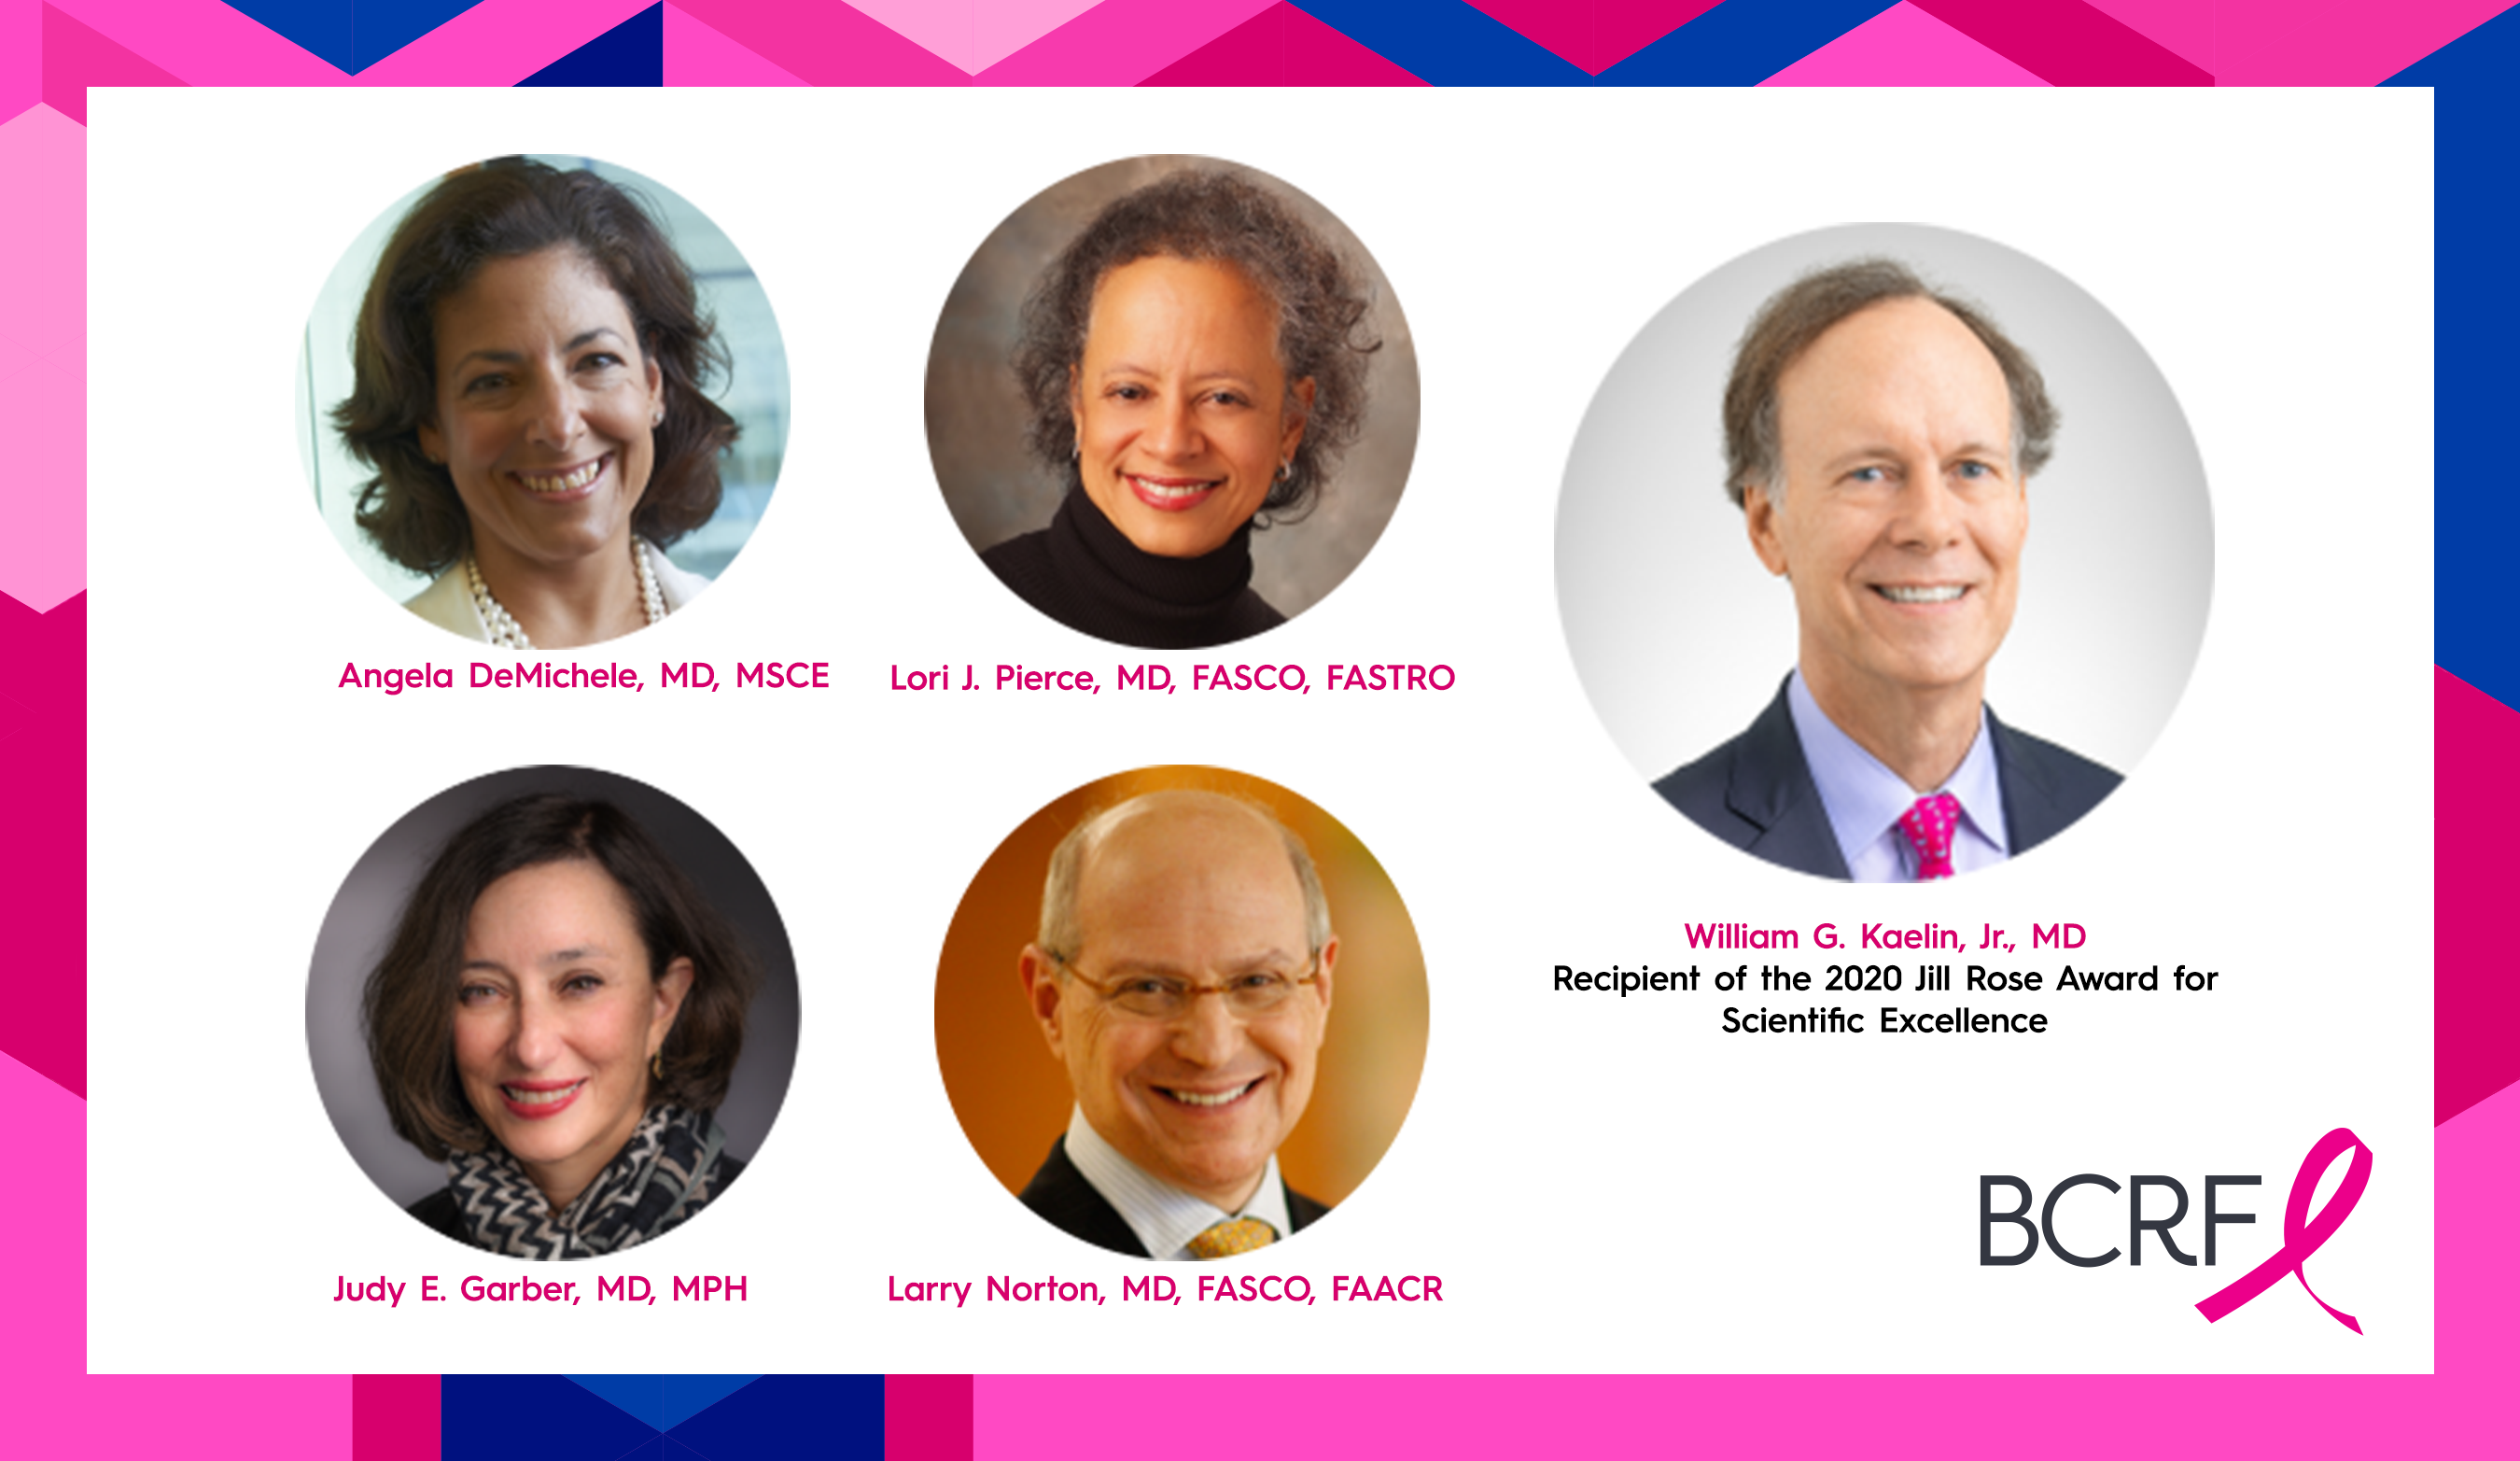 Get to Know the Panelists at This Year’s Symposium and Awards Luncheon